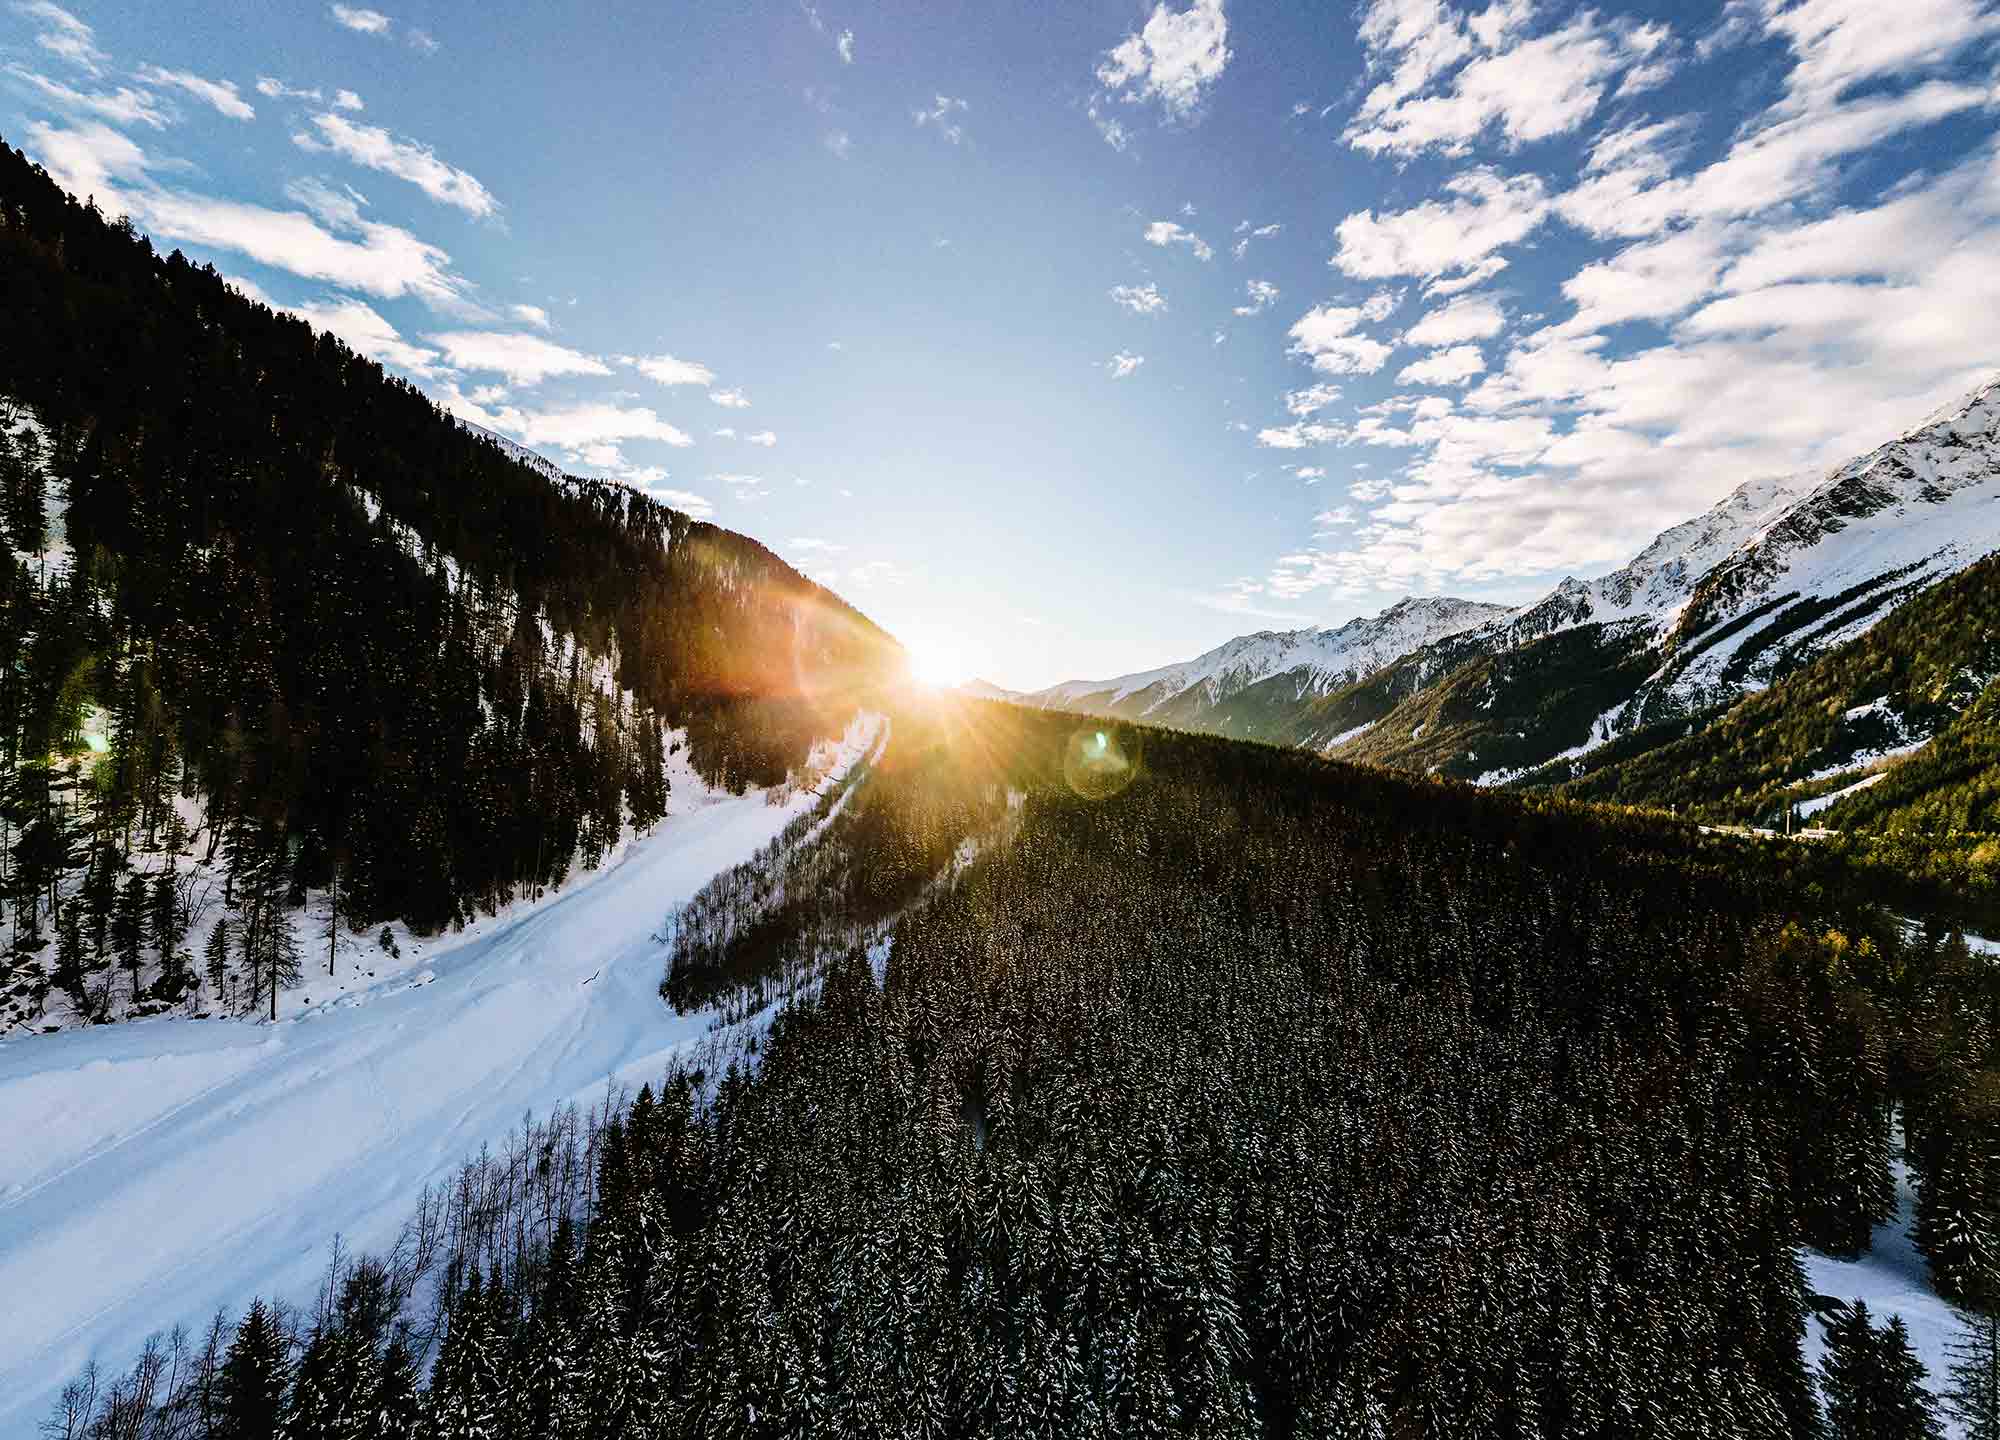 The sun shines through the snow-capped mountains of Anterselva